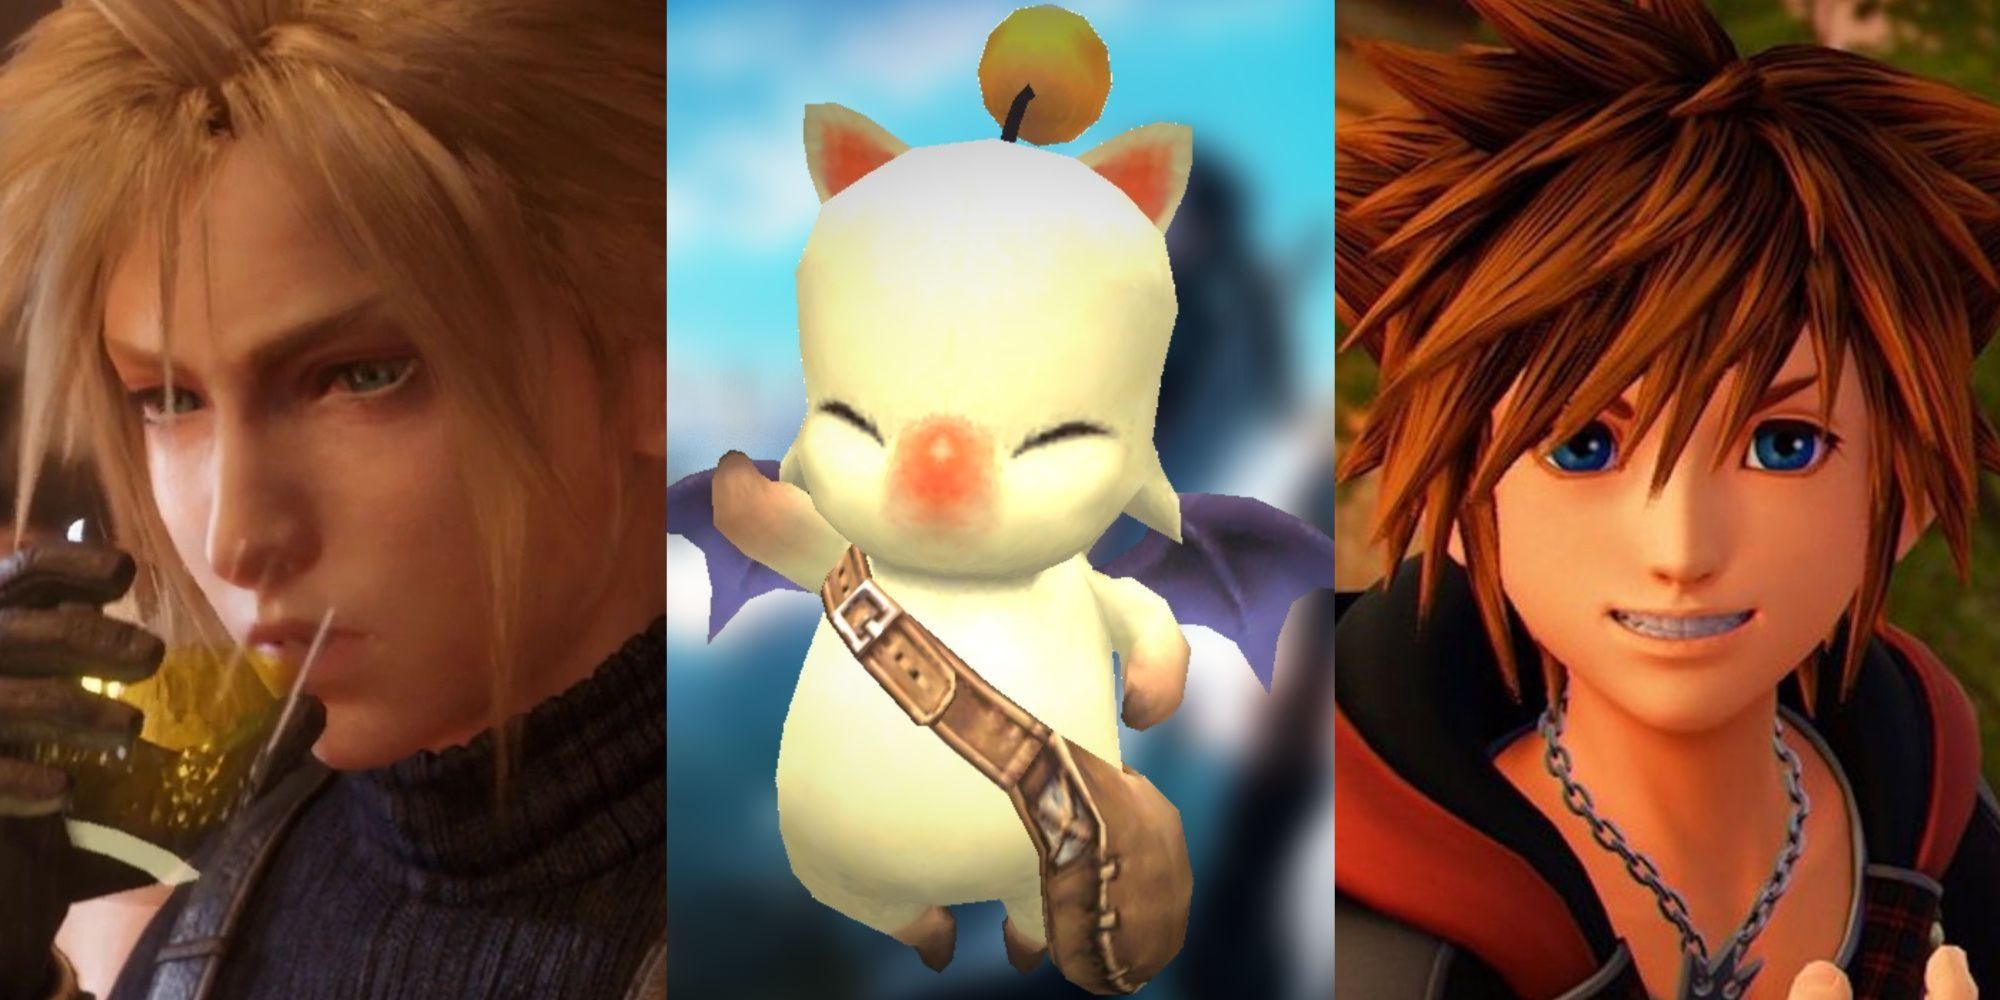 Cloud from Final Fantasy 7 Remake sipping a drink, a Moogle from Crisis Core with a satchel, and Sora smiling from Kingdom Hearts 3, left to right